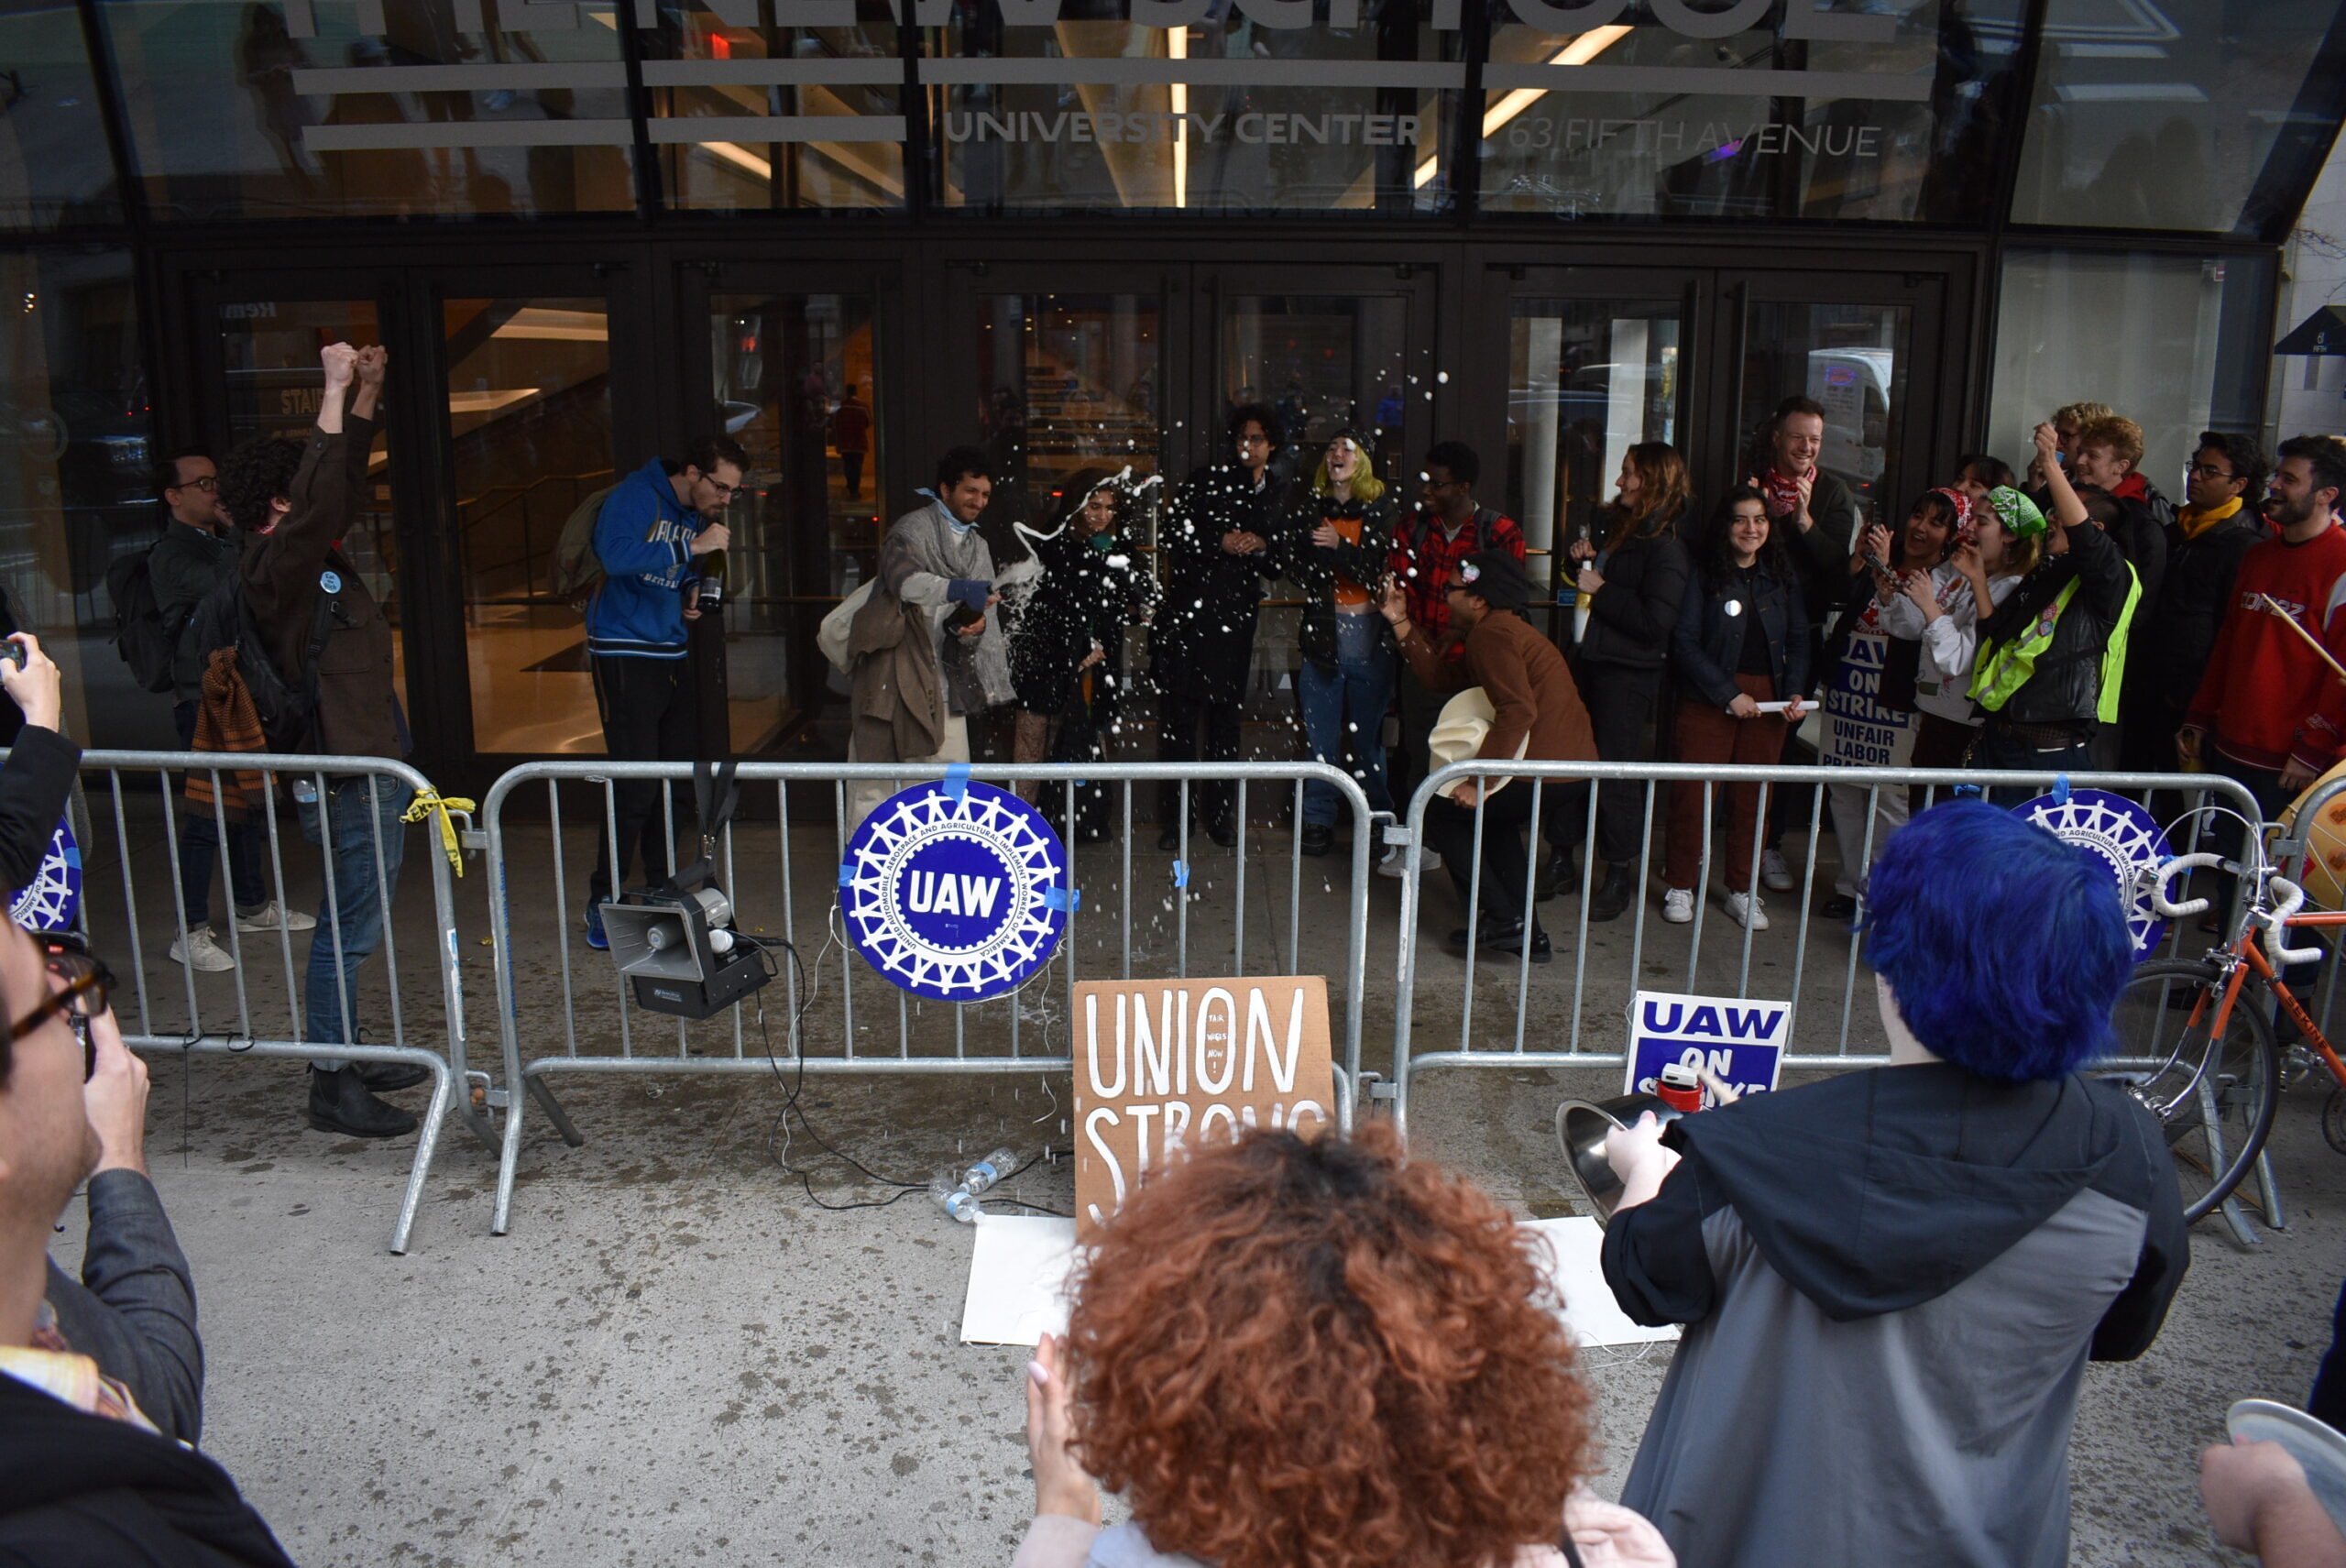 Union members celebrate with champagne in front of the UC, where temporary metal fences mark the UAW picket line.